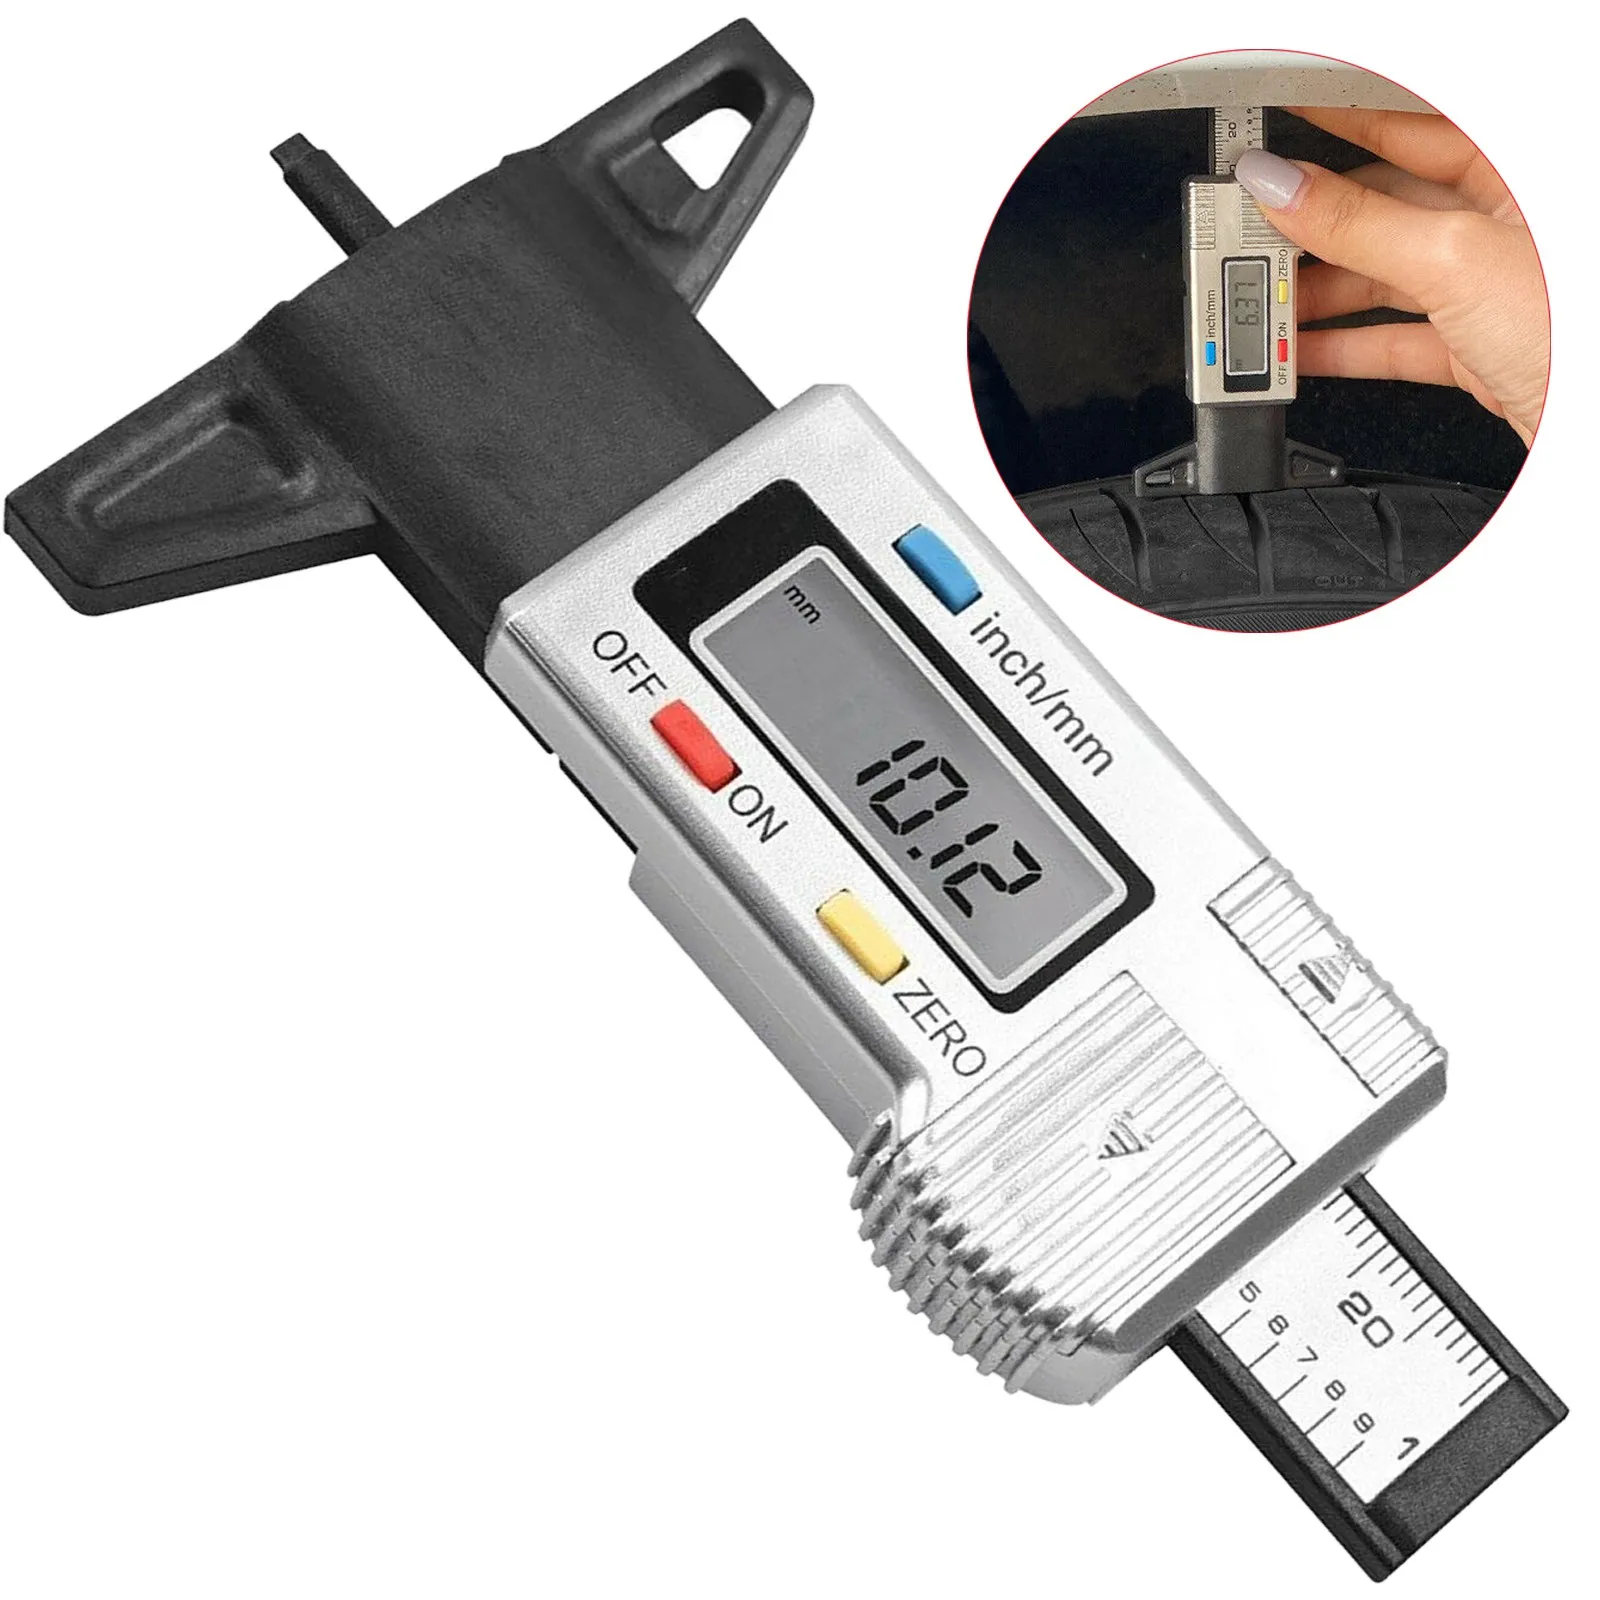 

Digital Car Tyre Tire Tread Depth Gauge Meter Auto Tire Wear Detection Measuring Tool Caliper Thickness Gauges Monitoring System